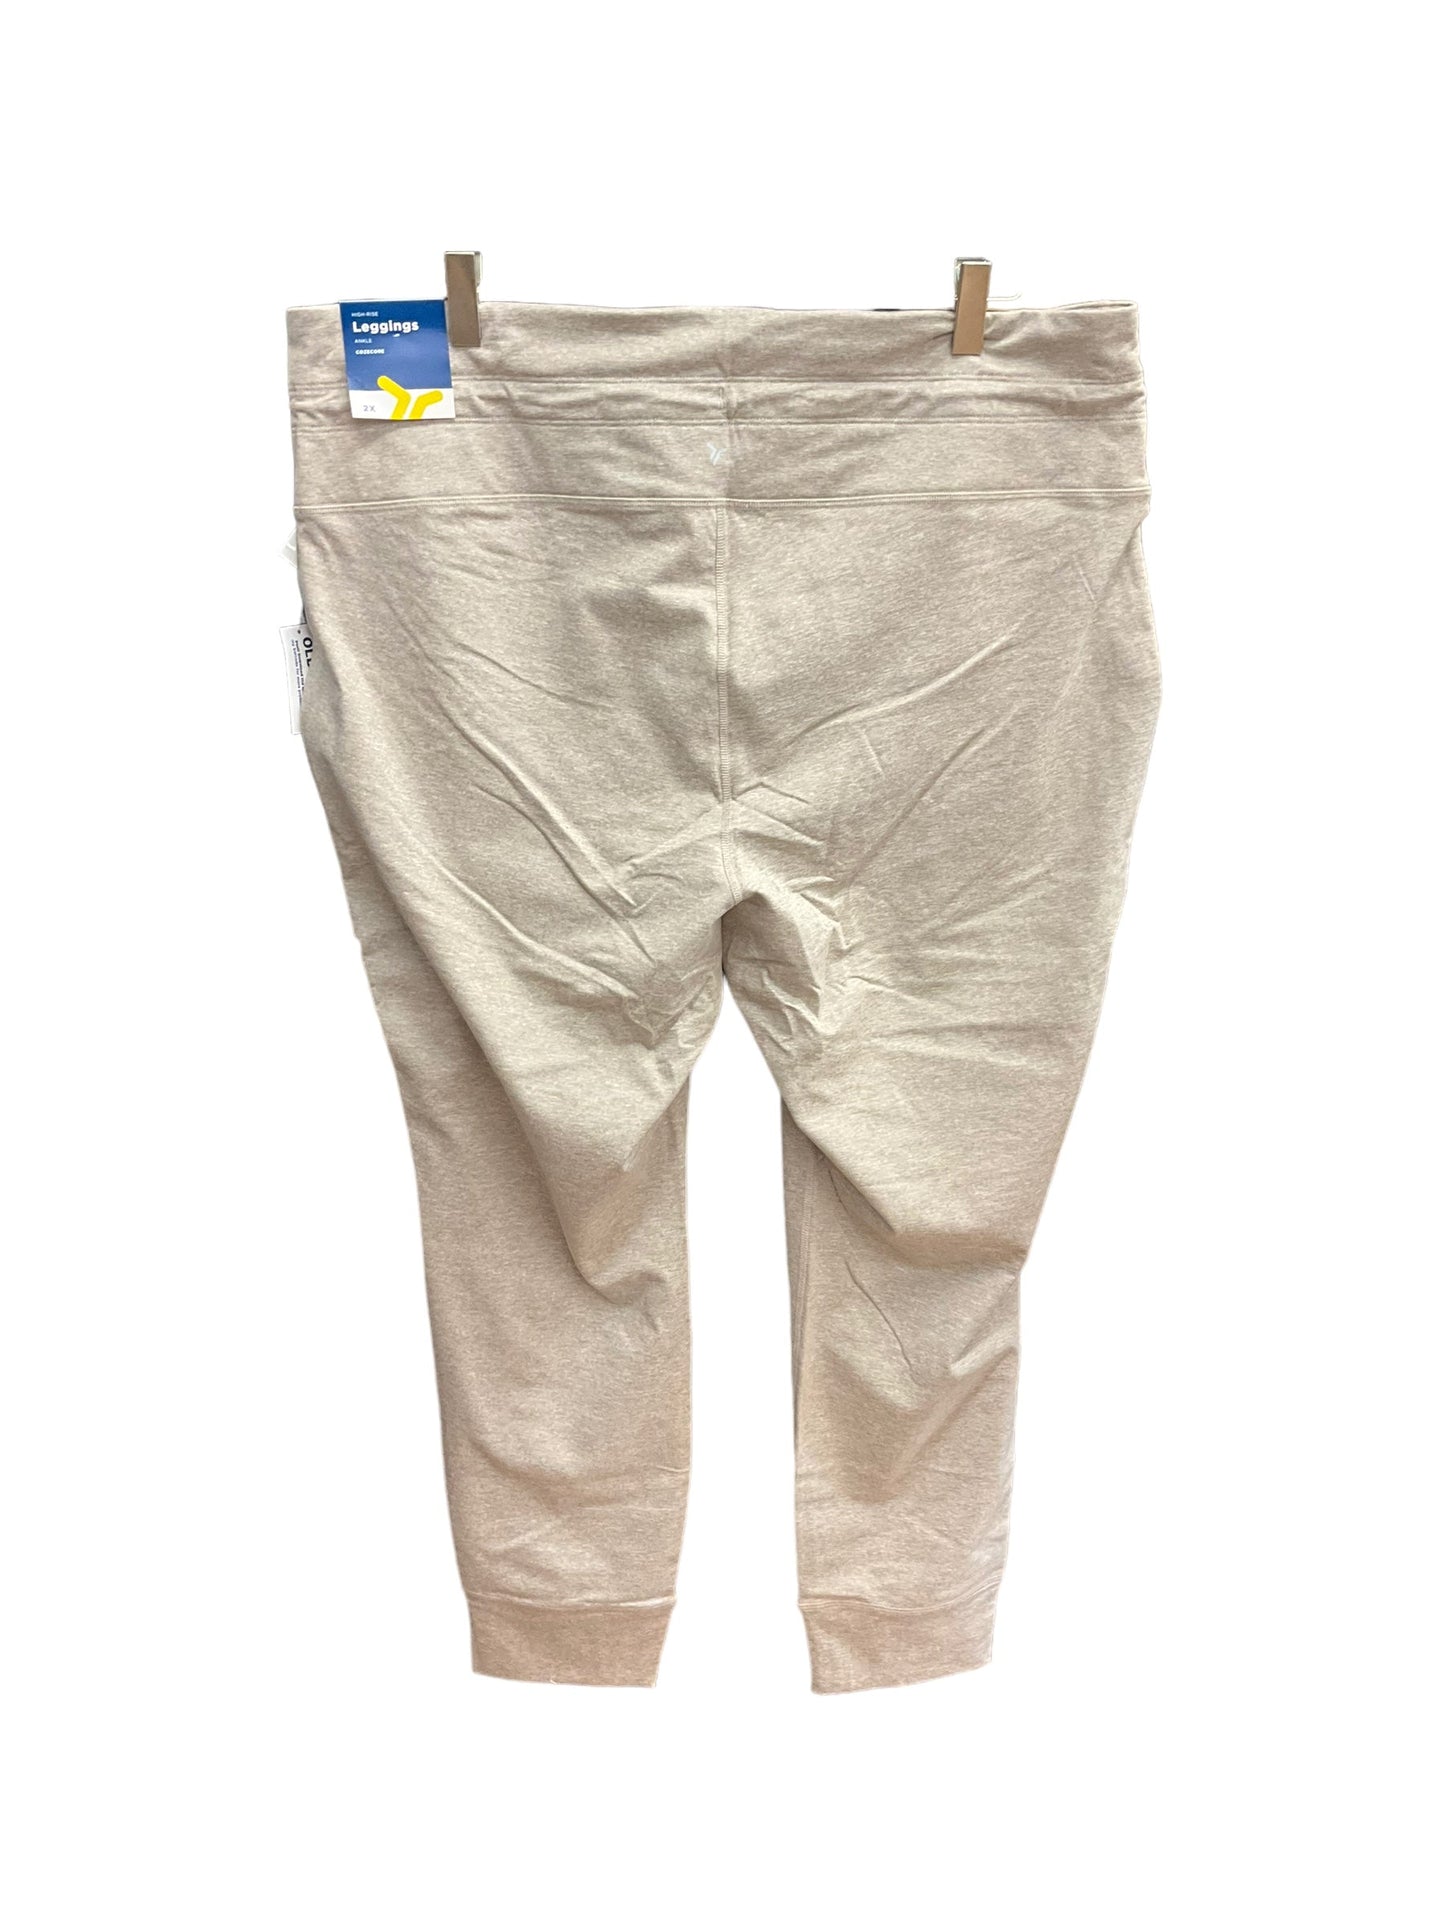 Beige Athletic Pants Old Navy, Size 2x